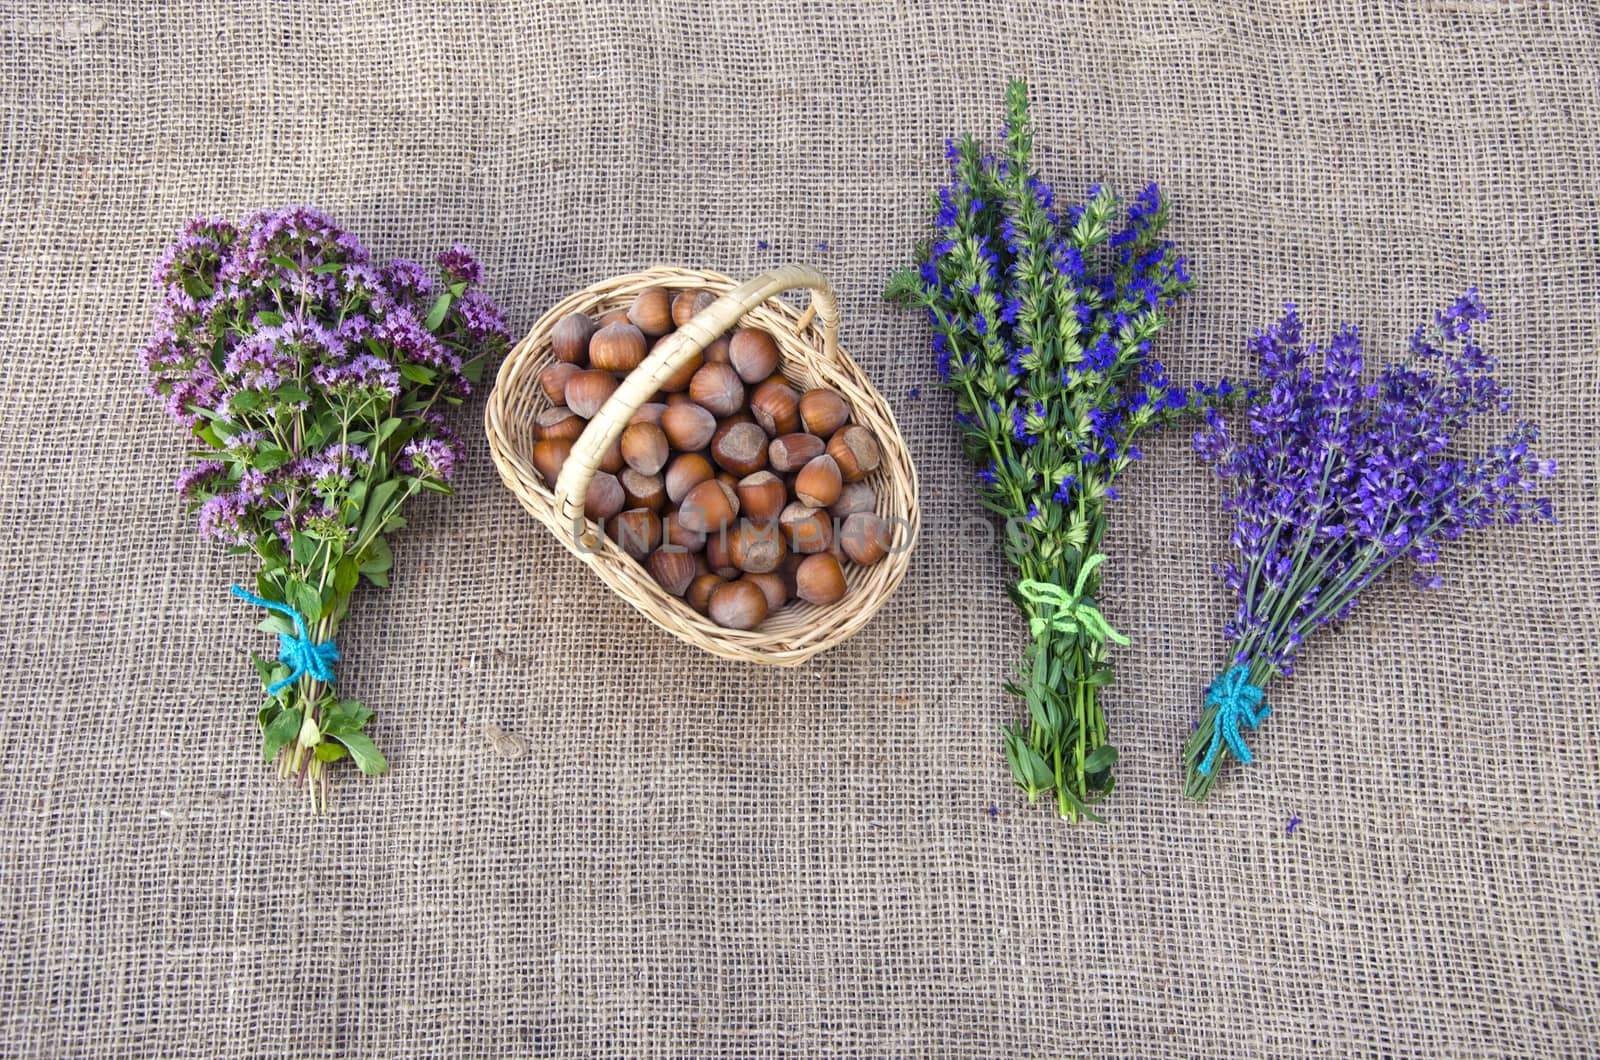 Selection of herbs and hazelnuts on linen background by alis_photo